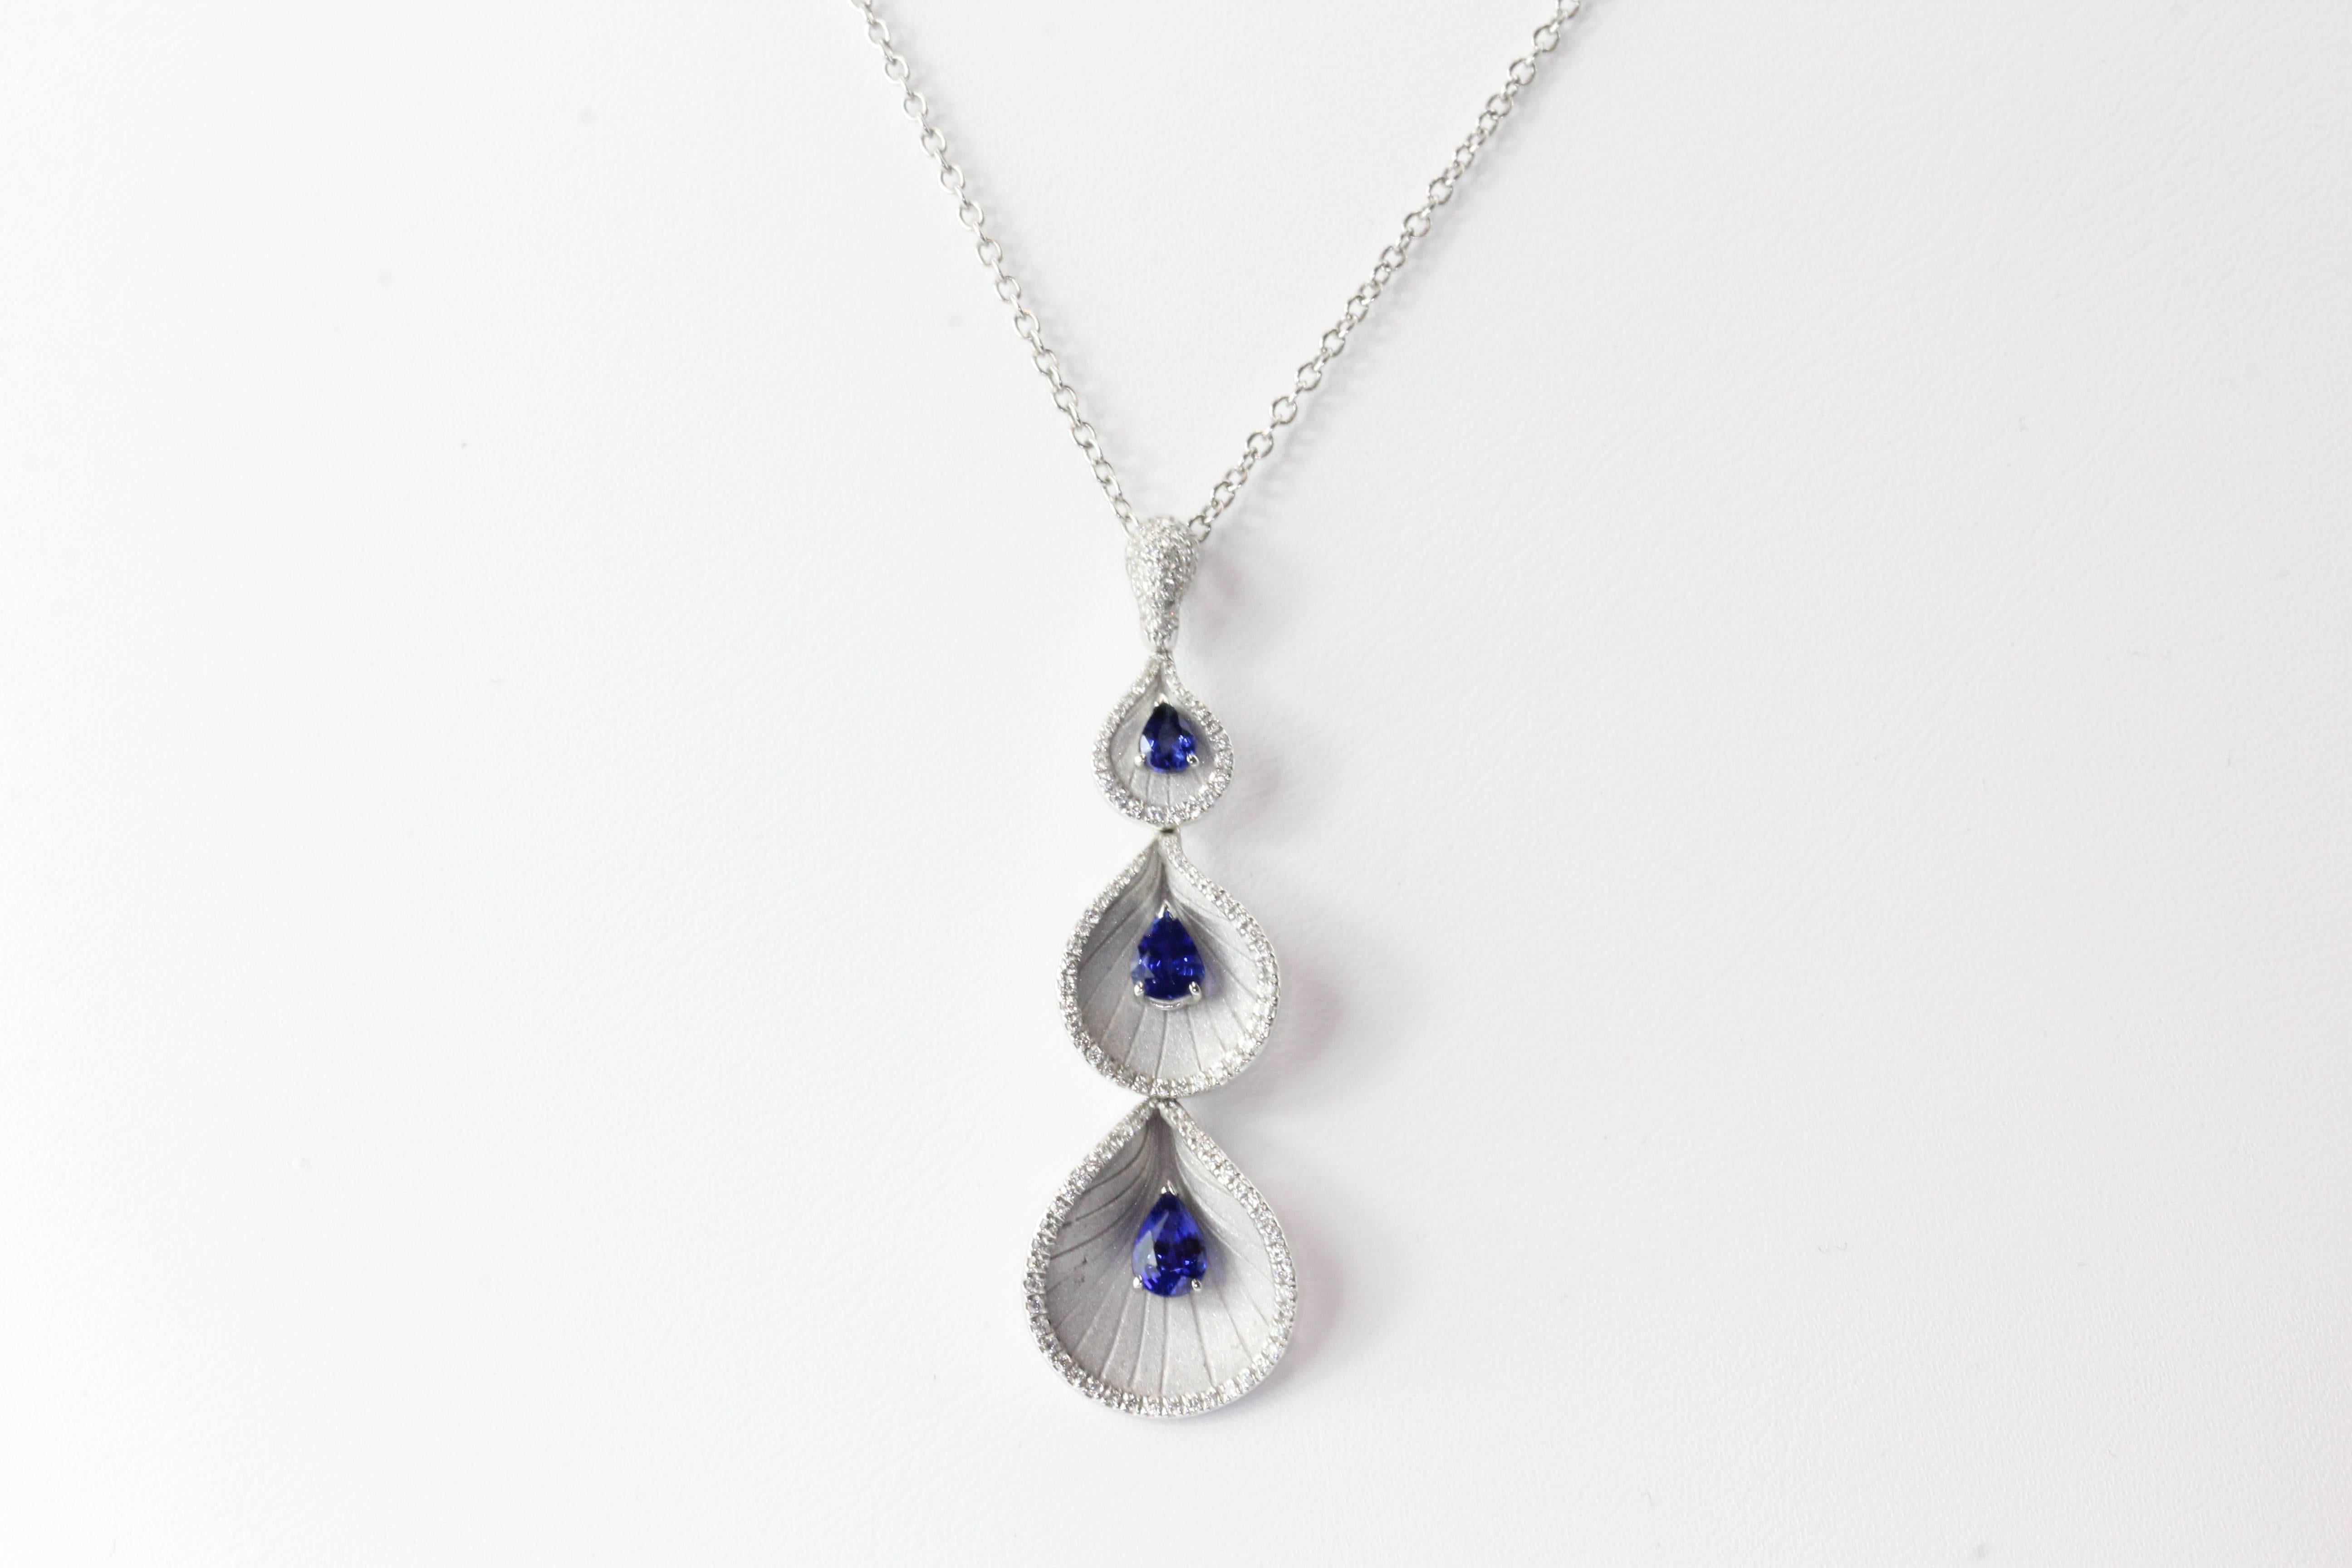 Annamaria Cammilli Premier Color Diamond & Sapphire 18K White Gold Necklace. The necklace is in excellent estate condition and ready to wear. It is signed "Cammilli 750" on the chain and "Ann Cammilli 750" on the pendant